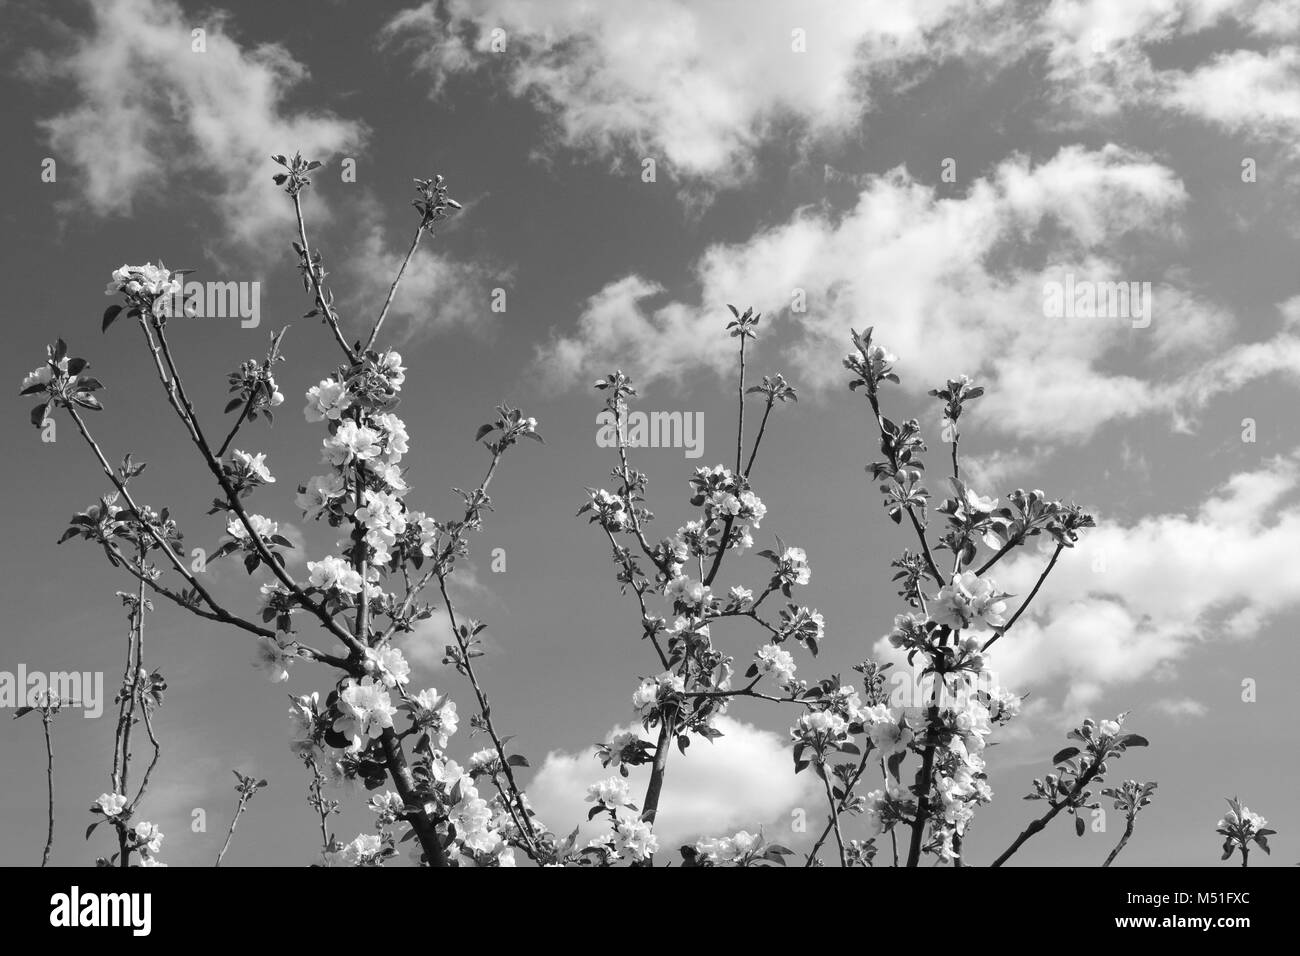 Crown of apple tree branches with white blossom flowers reach up to springtime sky with white clouds - monochrome processing Stock Photo